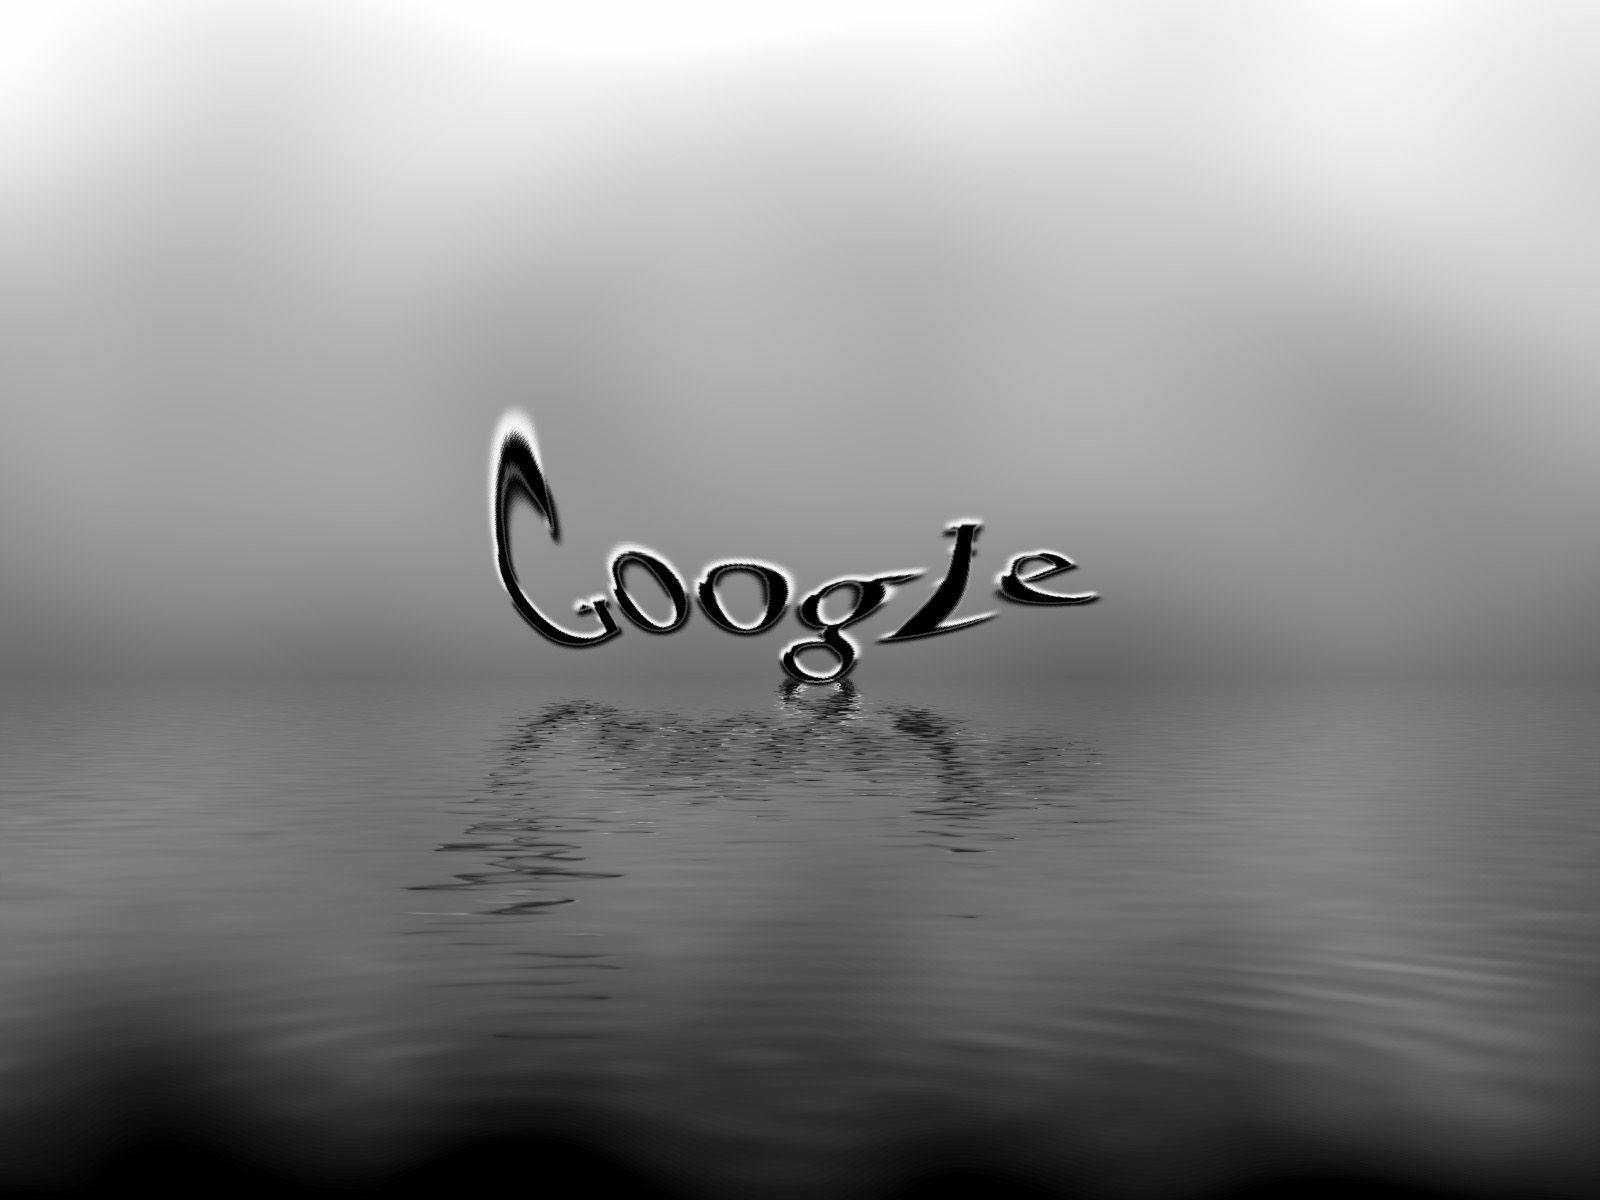 Awesome Collection of HD Google Wallpaper For Free Download